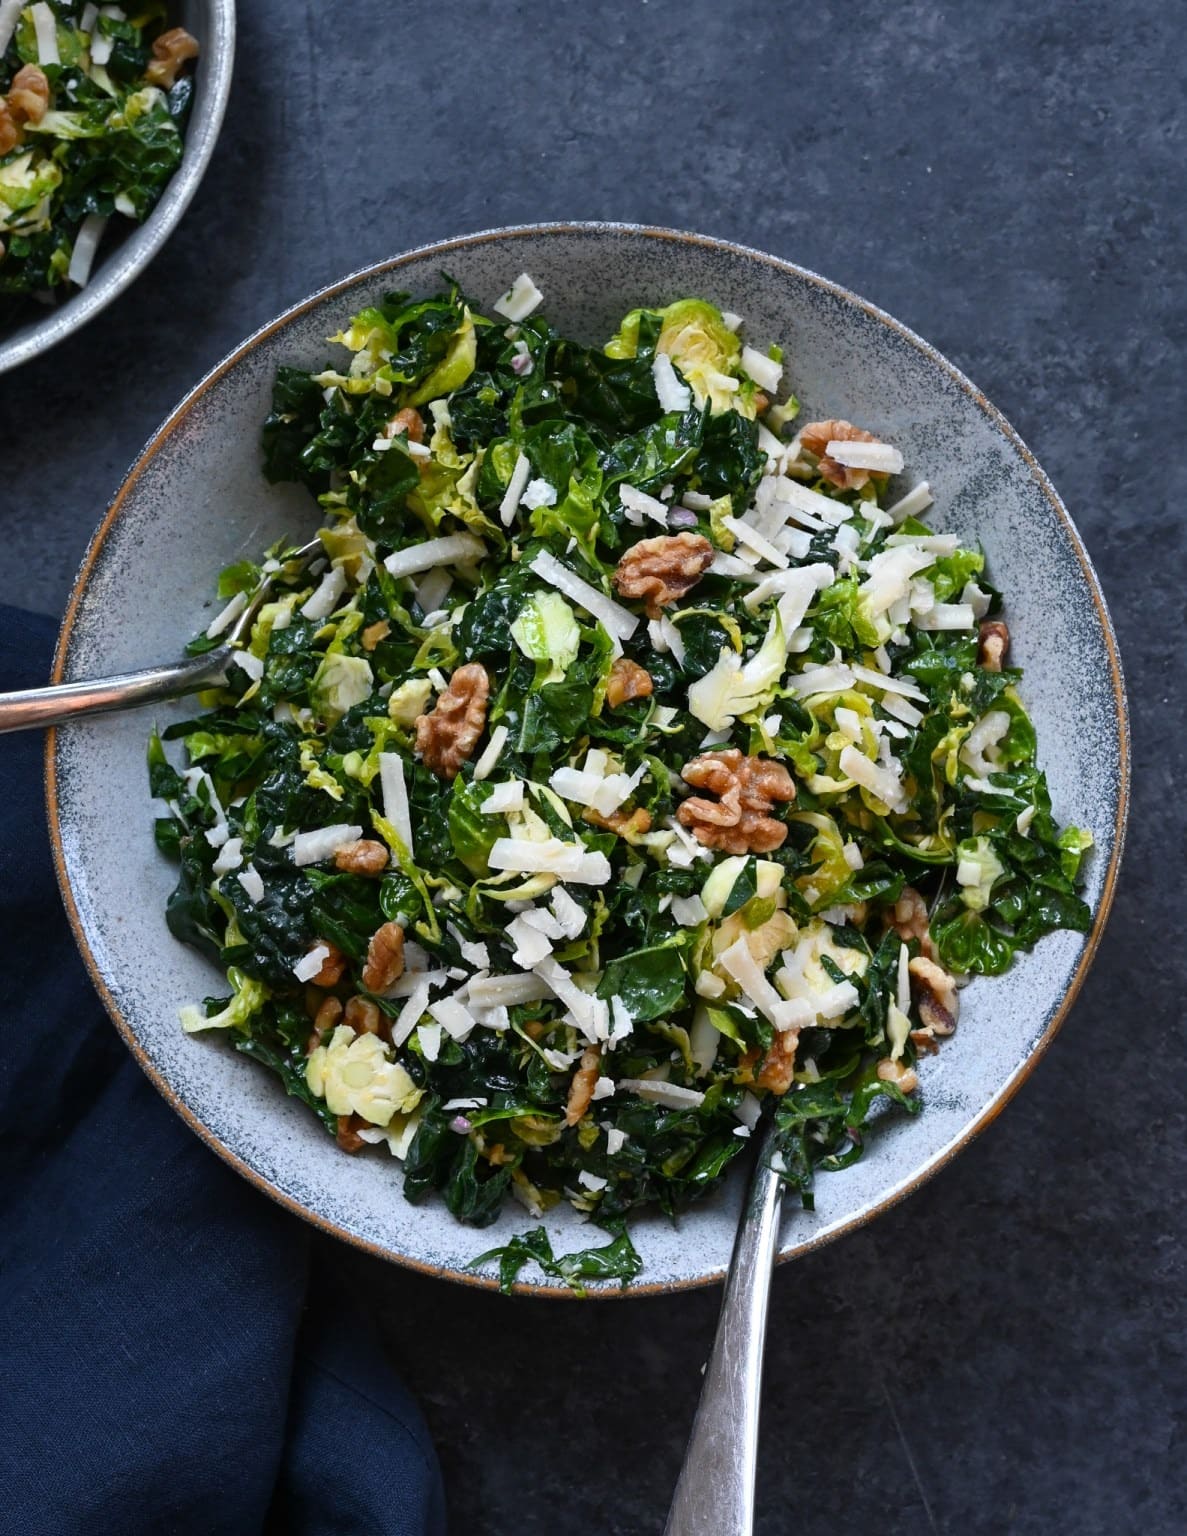 Kale & Brussels Sprout Salad with toasted walnuts, chunks of Parmesan and a lemony Dijon dressing served on a plate 